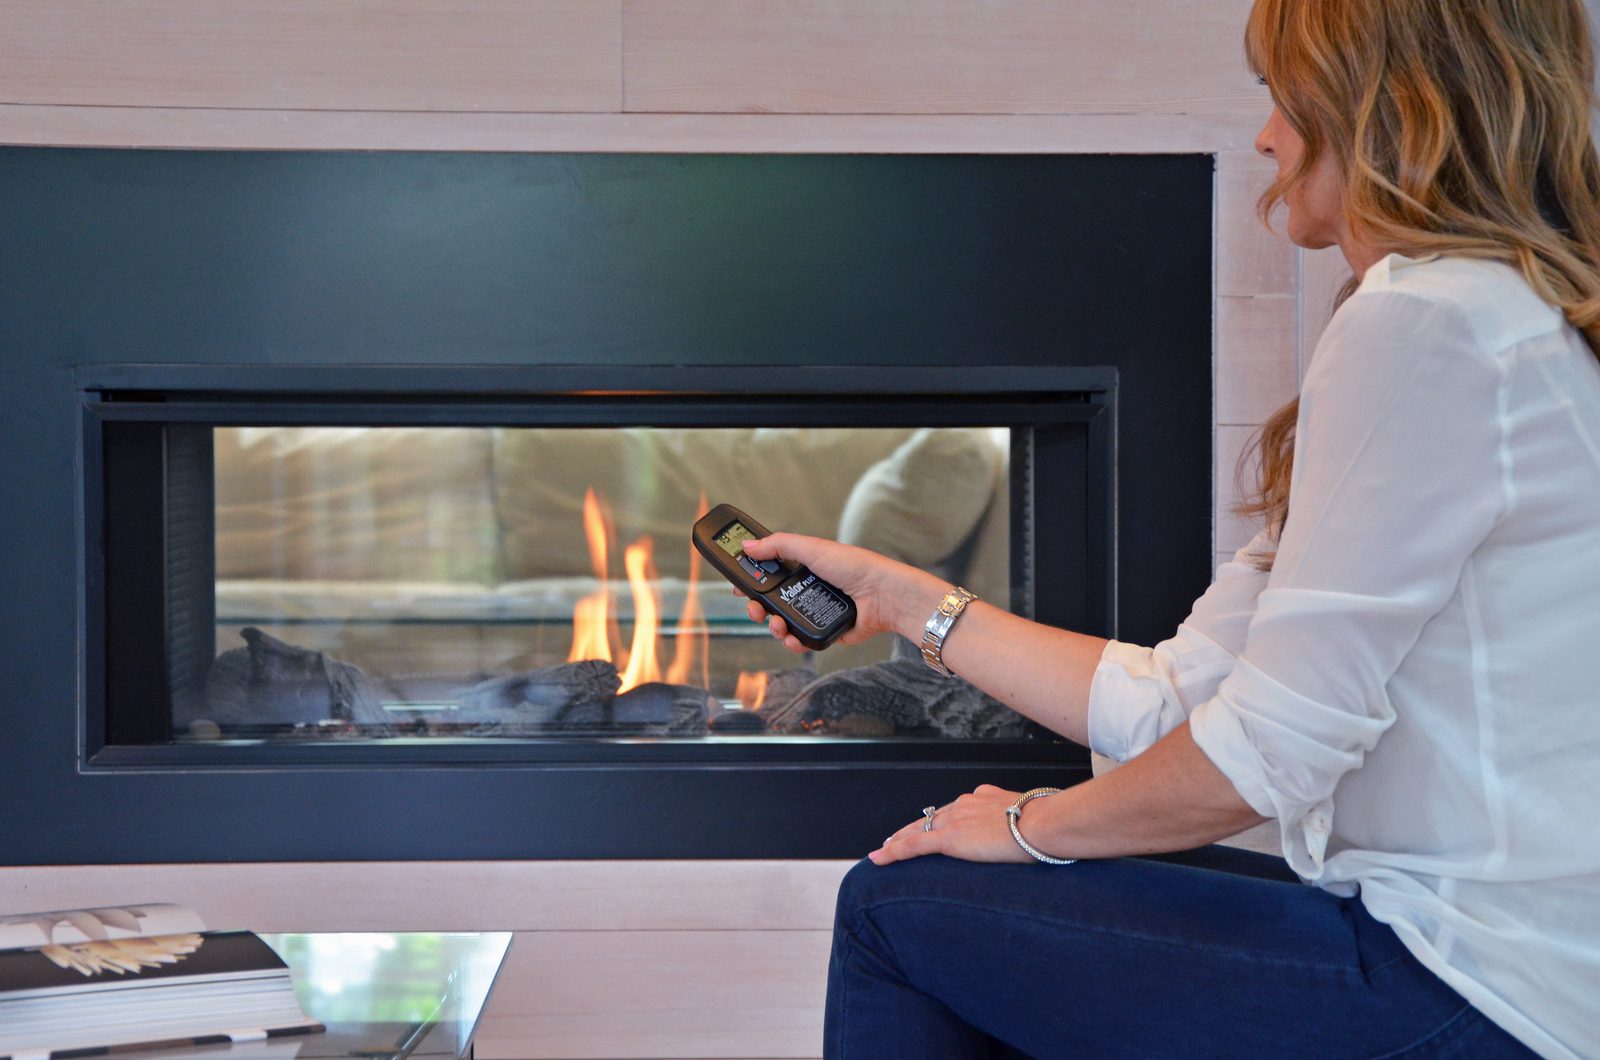 How To Turn On Pilot Light Gas Fireplace